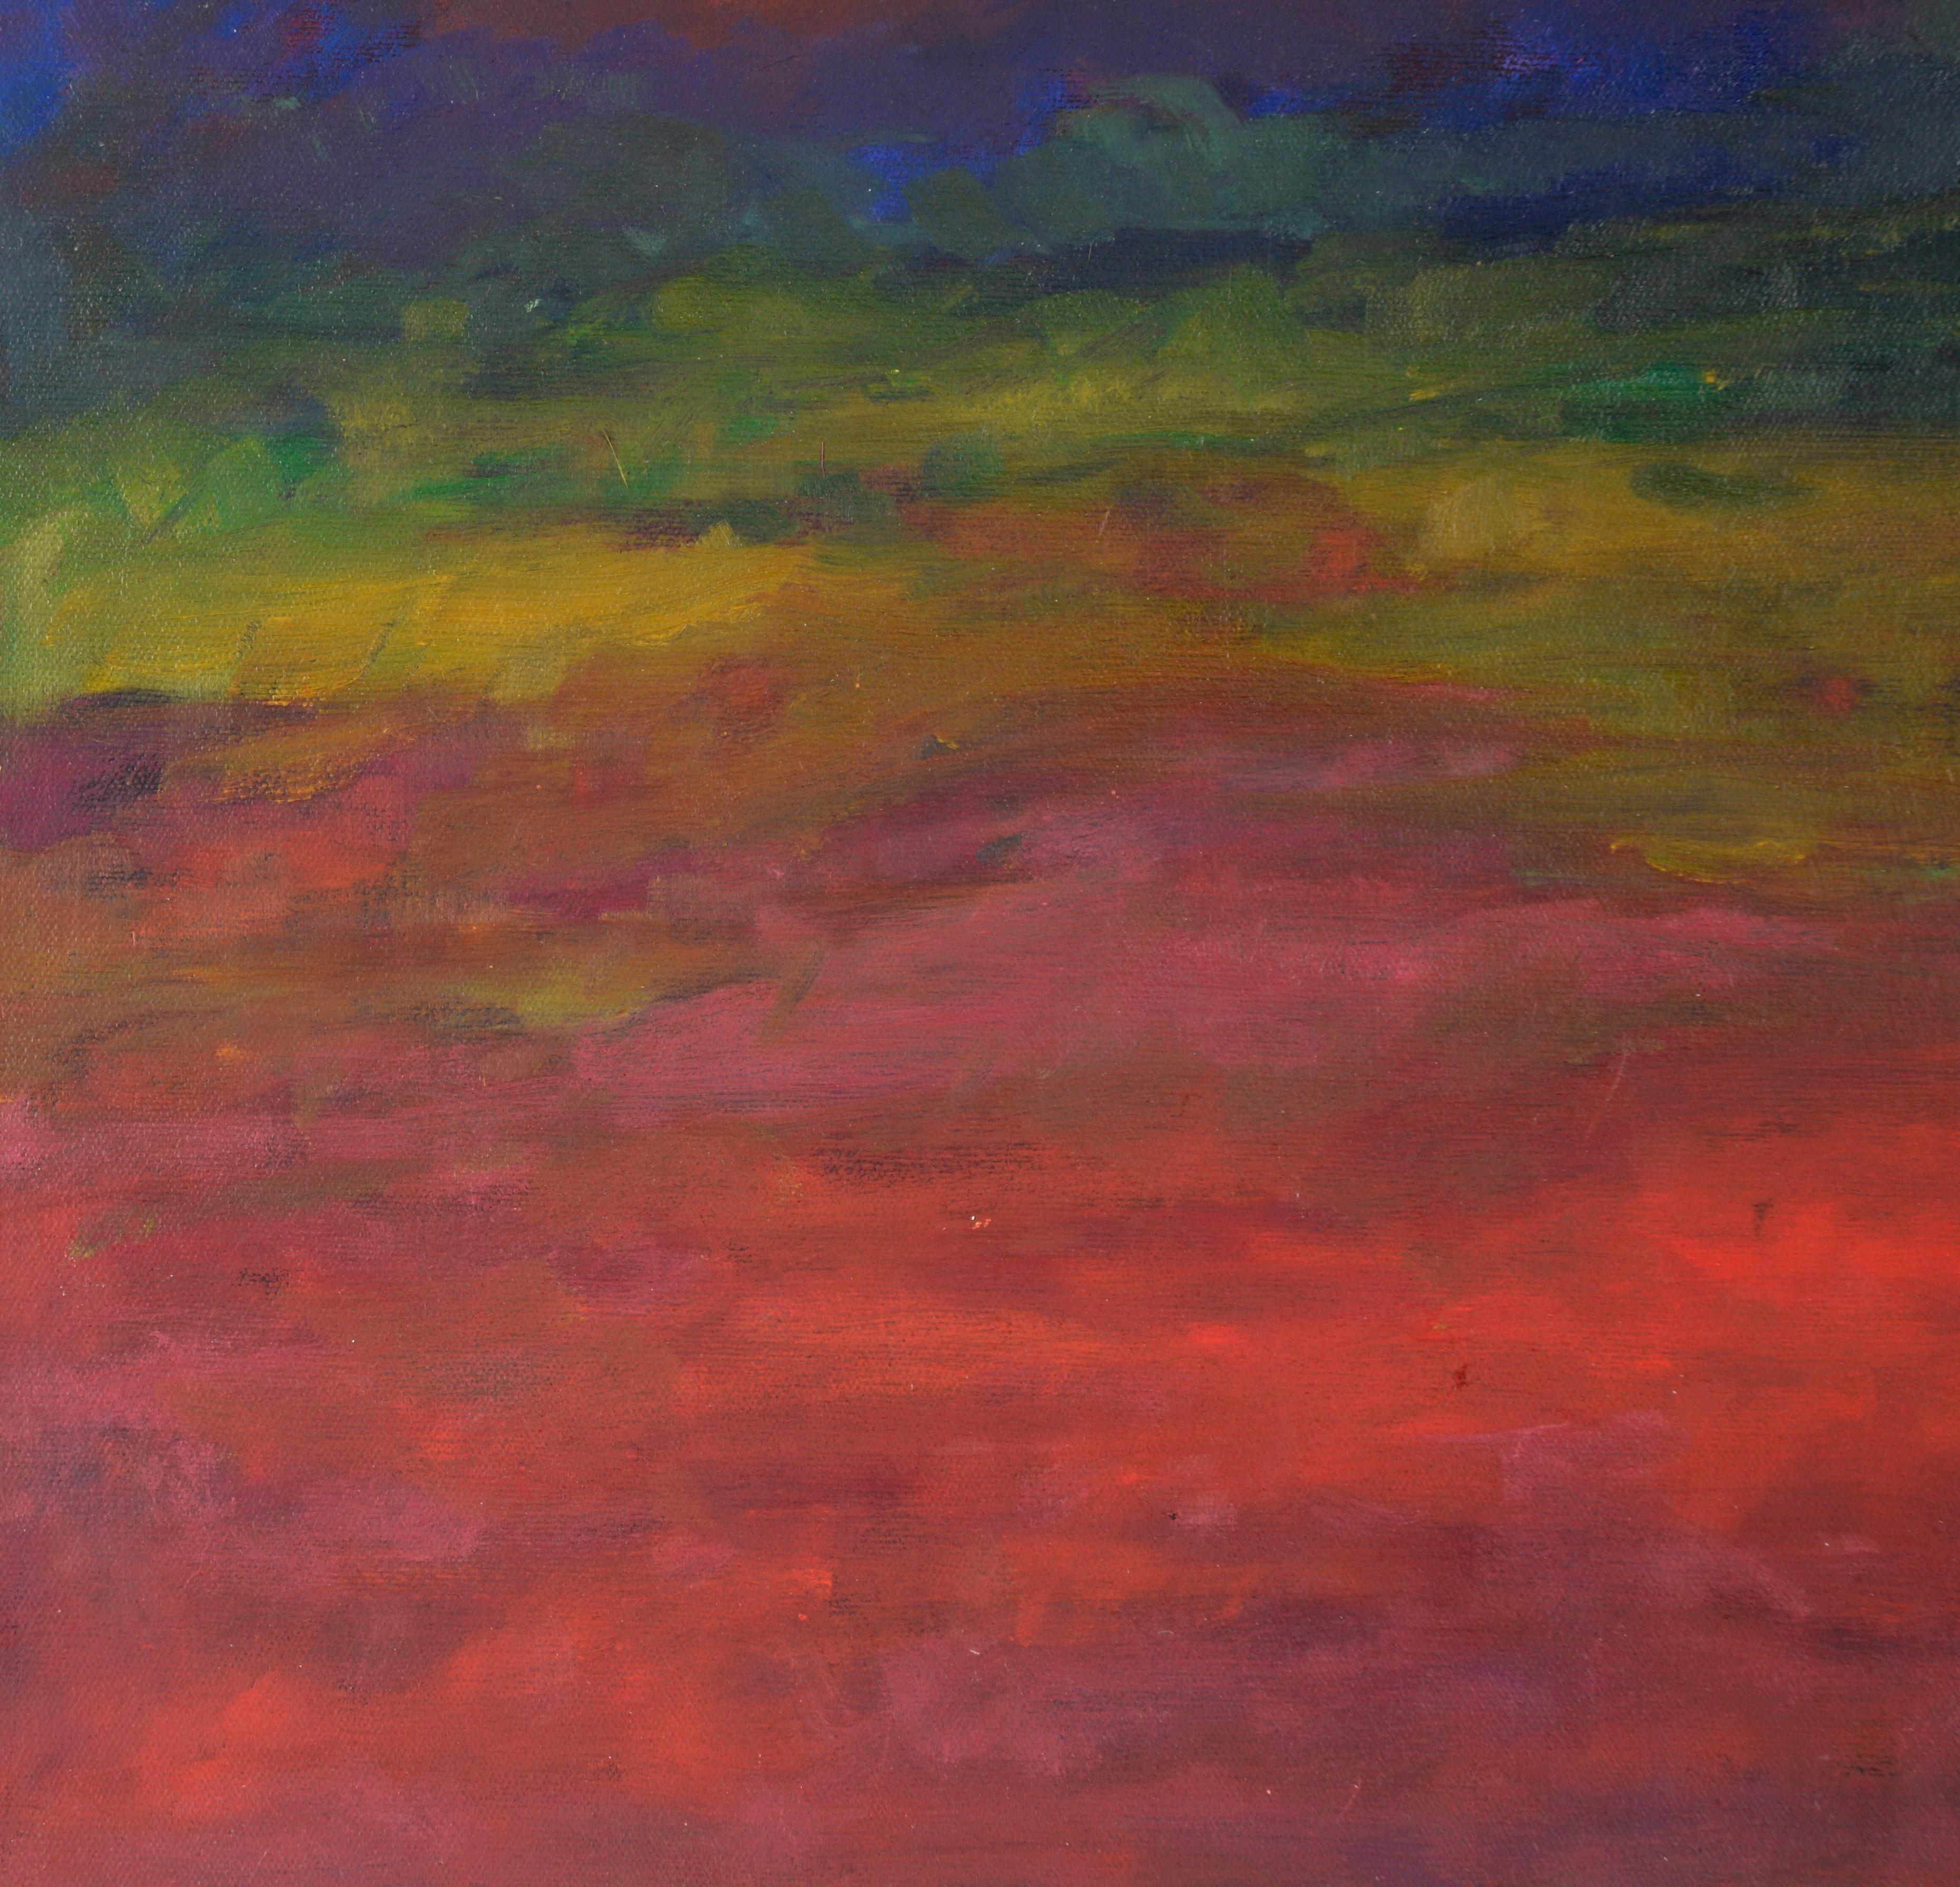 Glowing Red Sunset - Abstracted Landscape in Acrylic on Canvas - American Impressionist Painting by M. Pavao